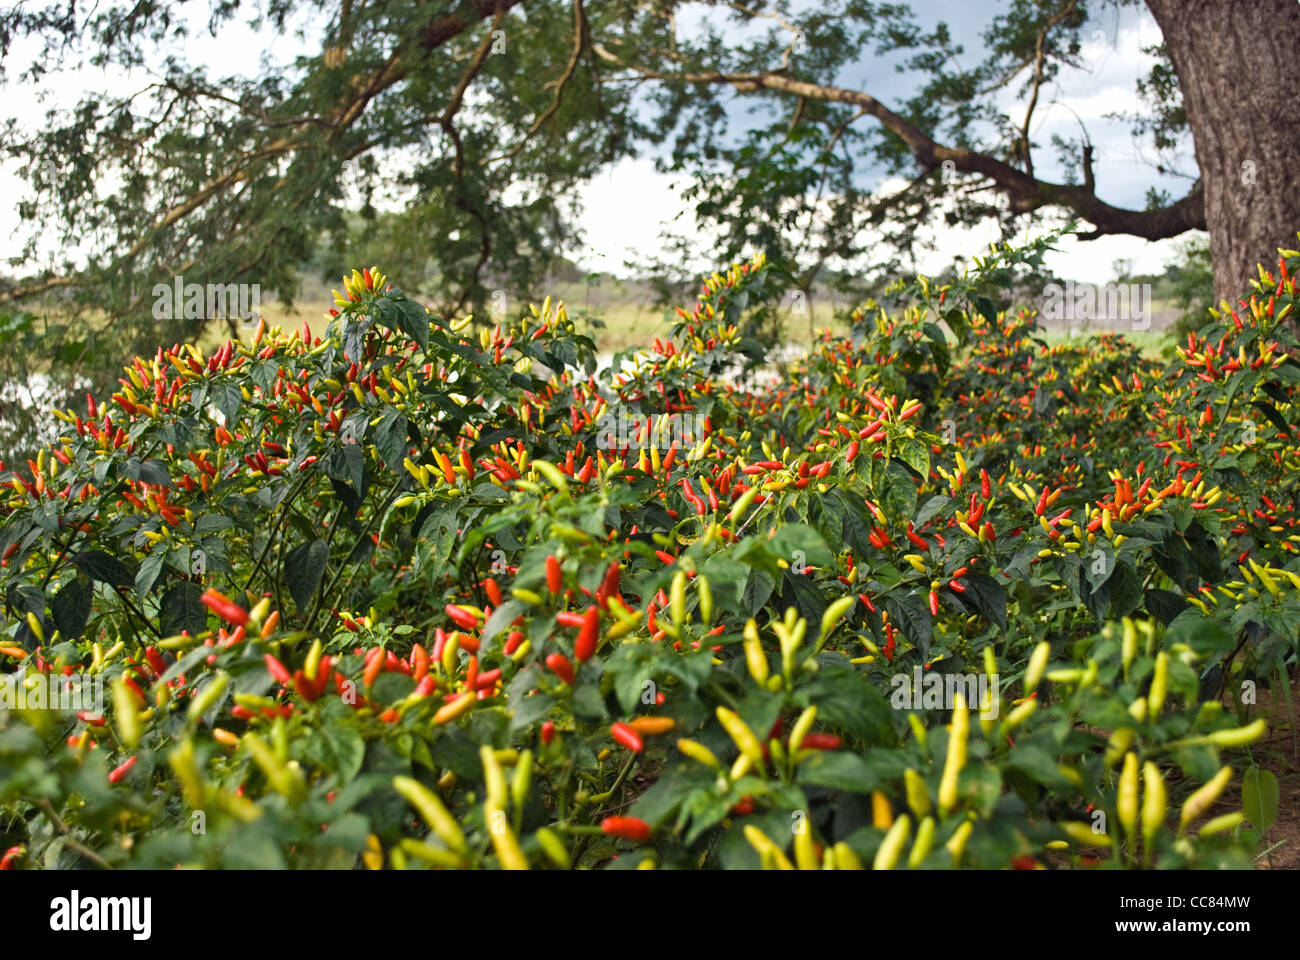 Chillies growing in Zambia. Chillies are used locally as an elephant deterrent. Stock Photo